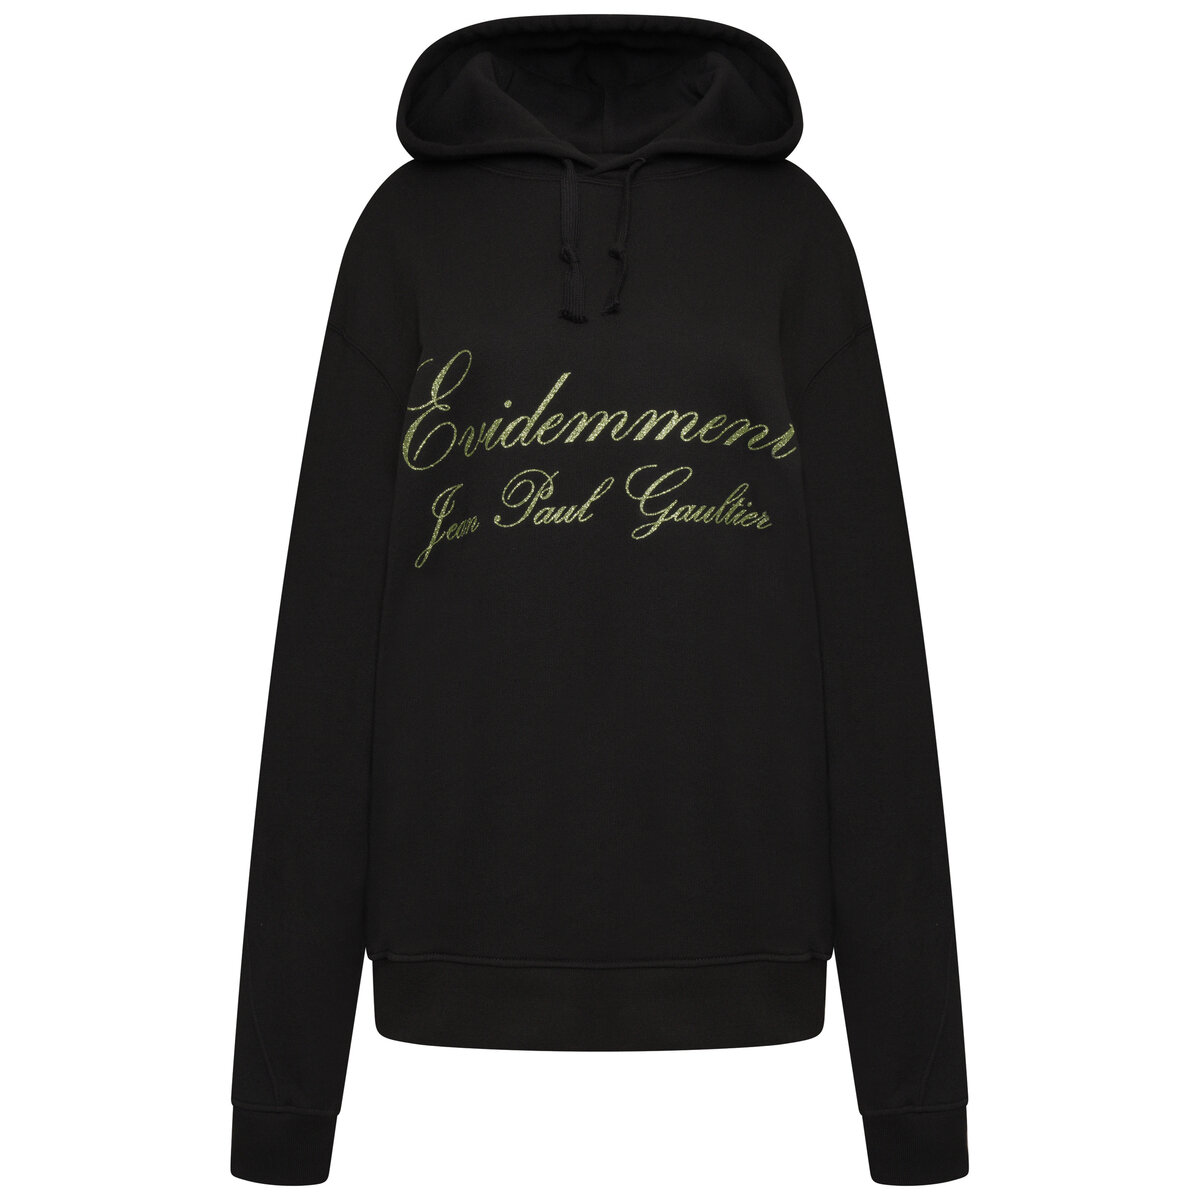 Printed Hoodie With Evidemment Glitters Xl Black